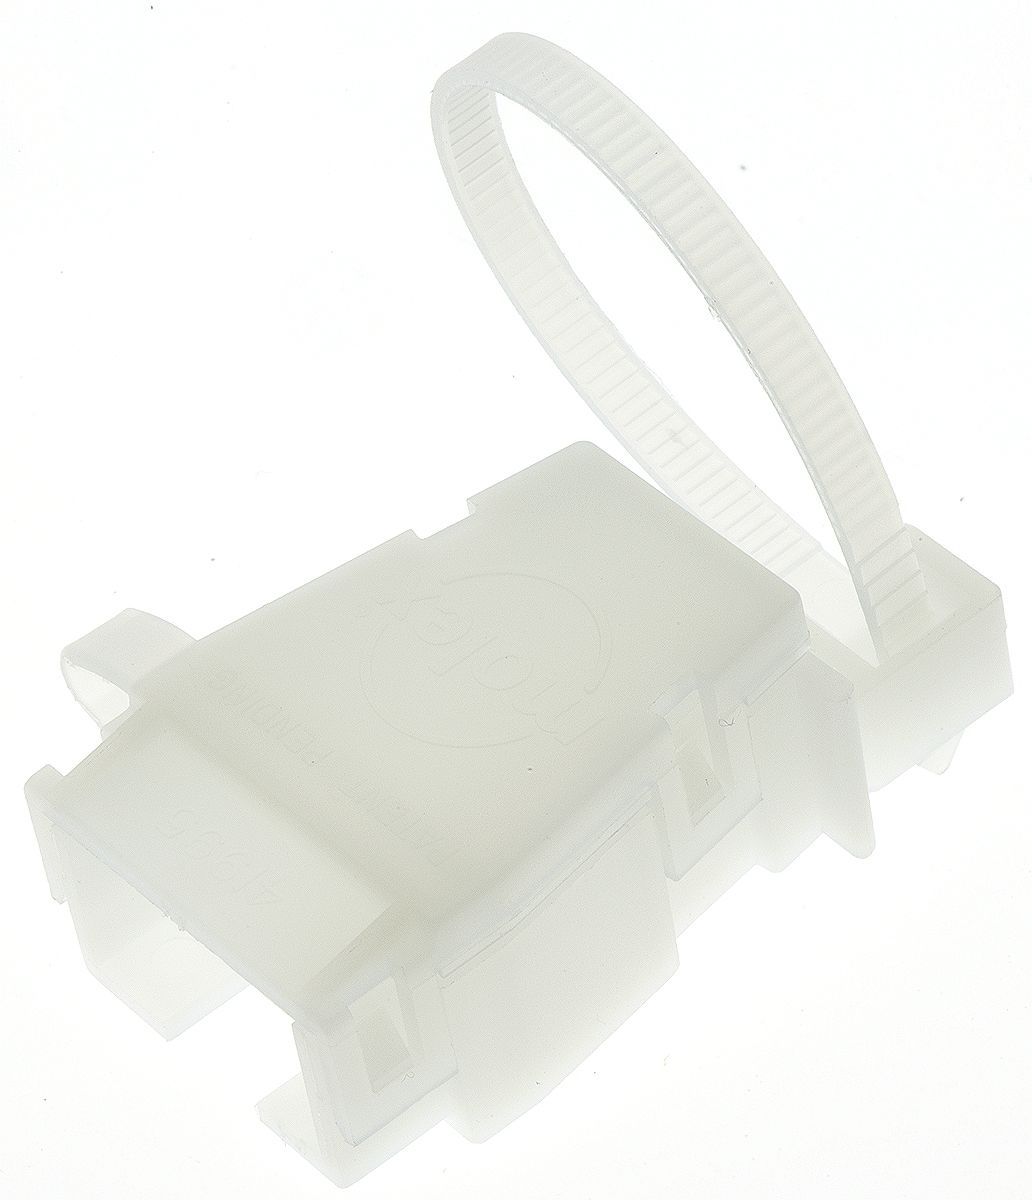 Molex Strain Relief for use with Jr. Plug Housing, Jr. Receptacle Housing, Mini-Fit